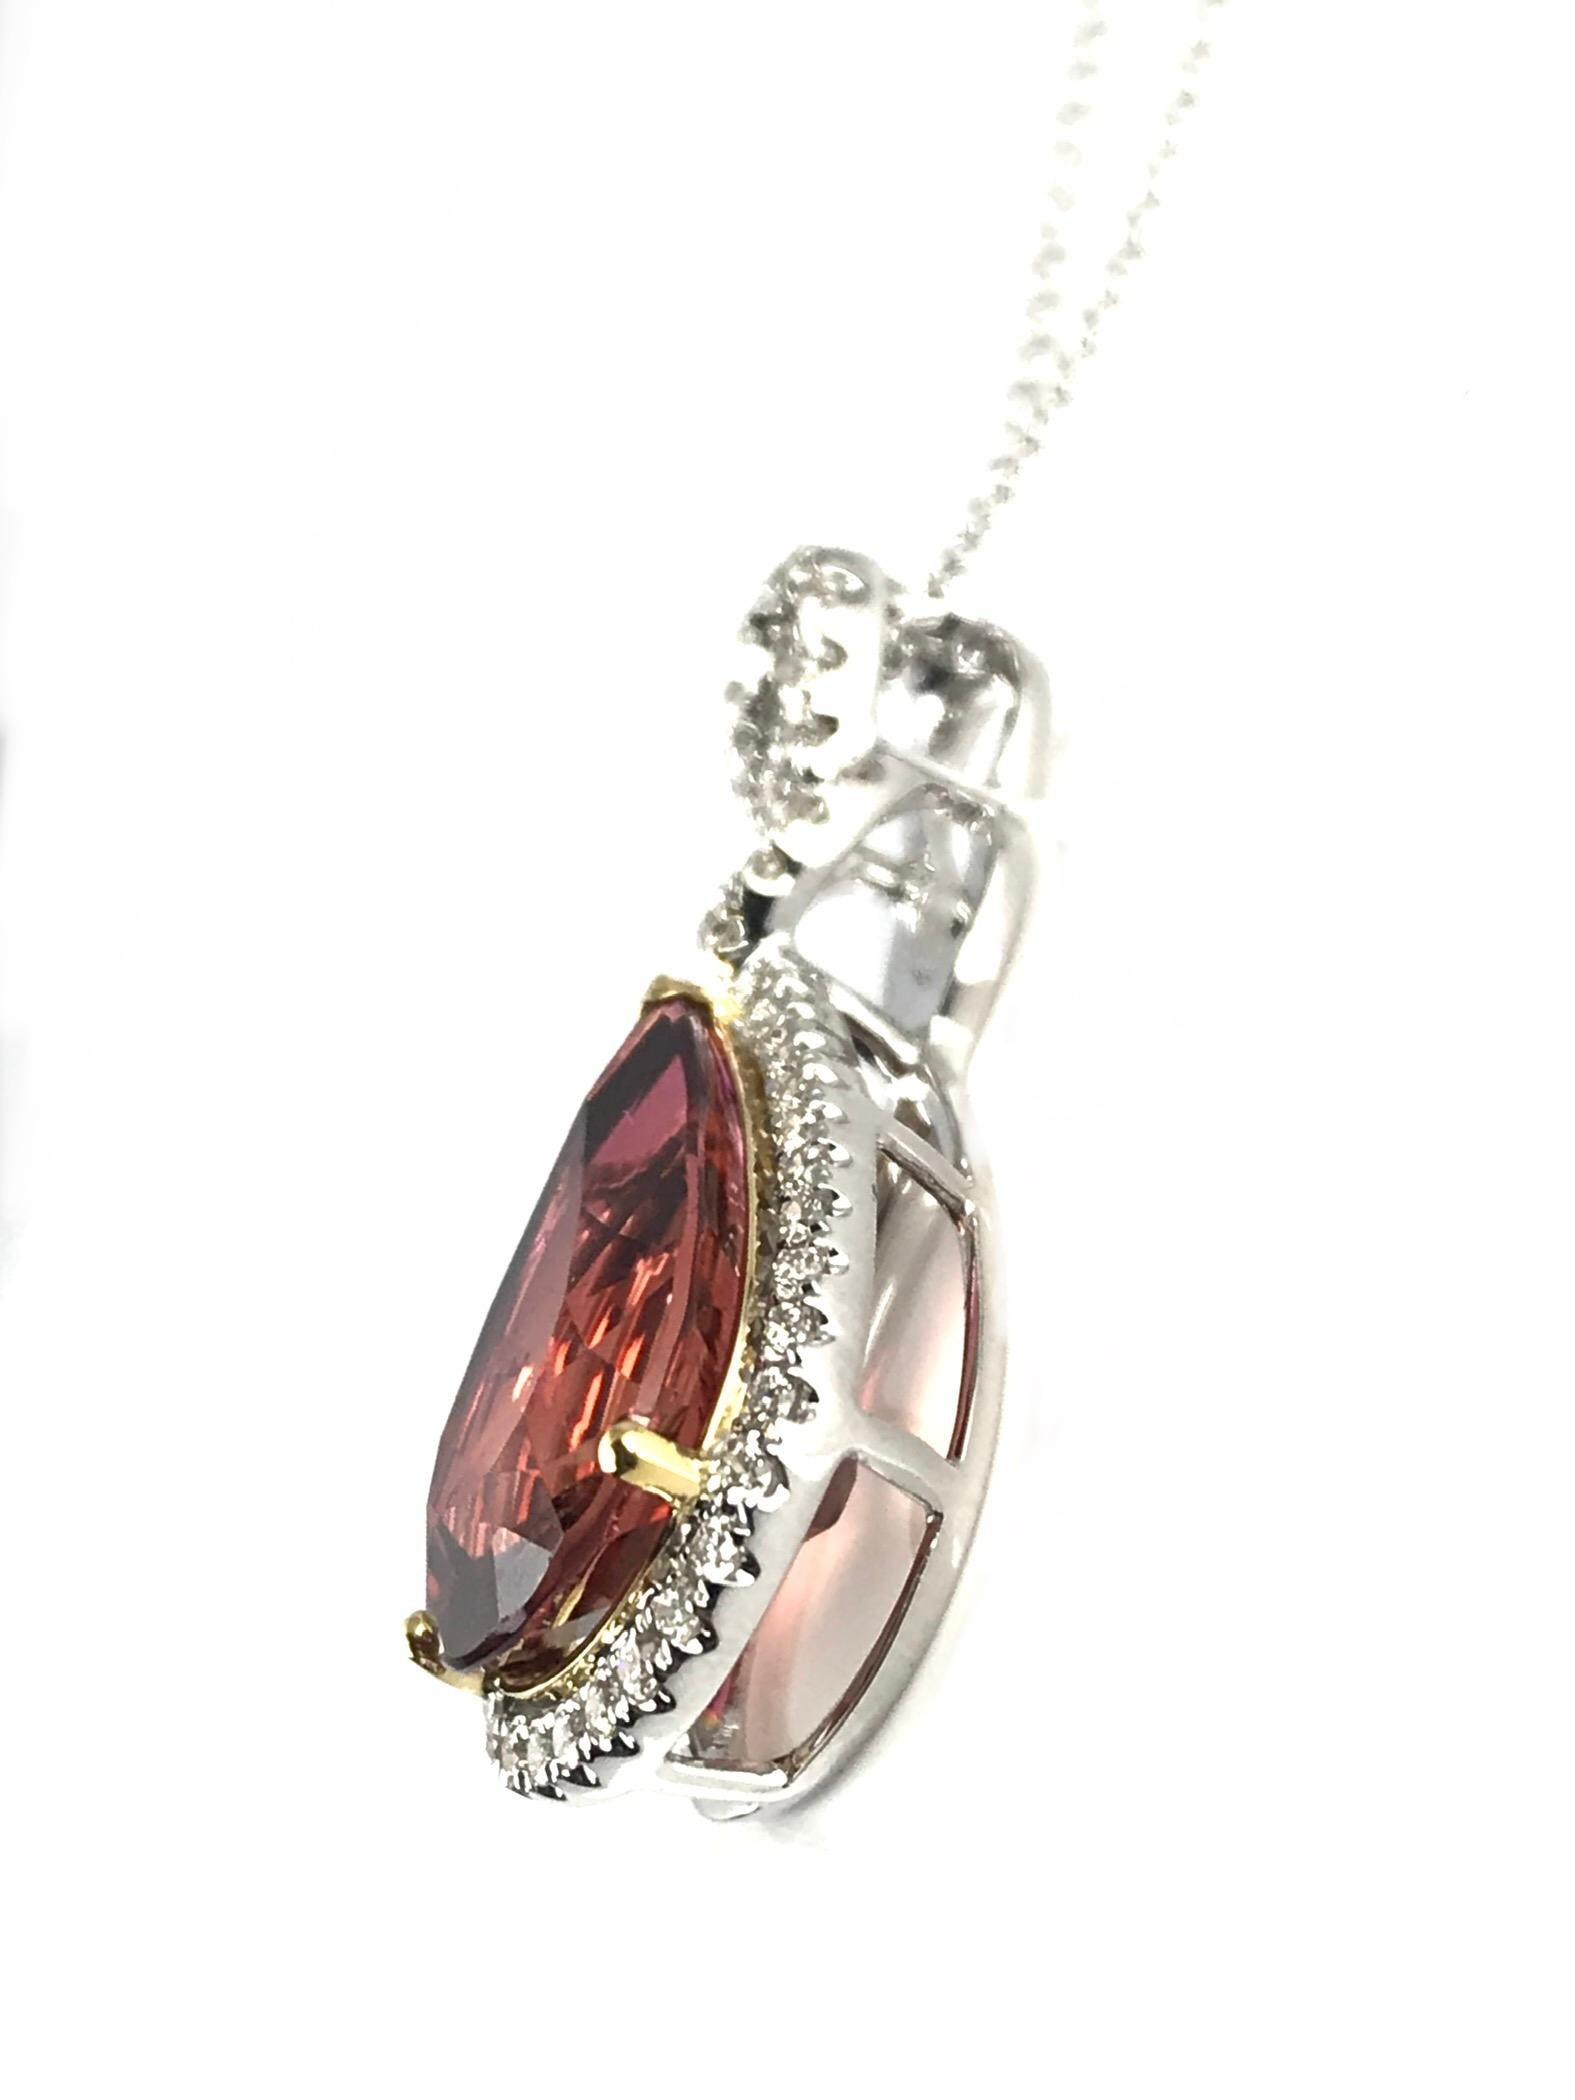 At the heart of this pendant lies a 5.68 carat pear-shaped peach tourmaline, a gemstone renowned for its rare and captivating color. The enchanting peach hue is reminiscent of a romantic sunset, casting a warm and gentle glow that is as unique as it